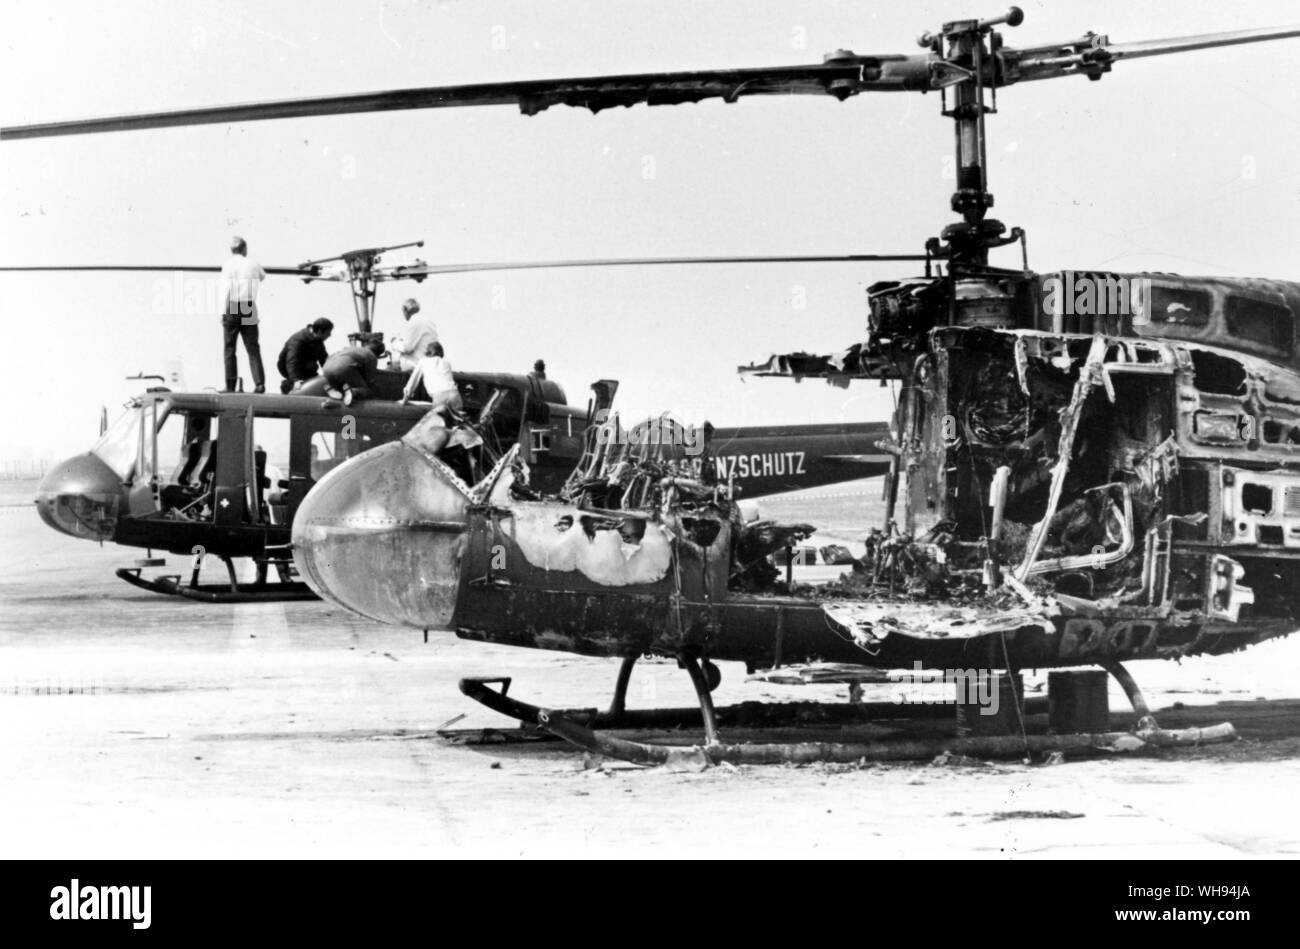 Incident at the Munich Olympics, 1972. Helicopter wreckage. Experts examine the wreckage of two German Border Police helicopters at Fuerstenfeldbrueck, near Munich. The helicopter in the foreground is burnt out after a hand grenade explosion. Nine Israeli Olympic athletes dies in a shoot out between their Palestinian captors and German Police.. Stock Photo